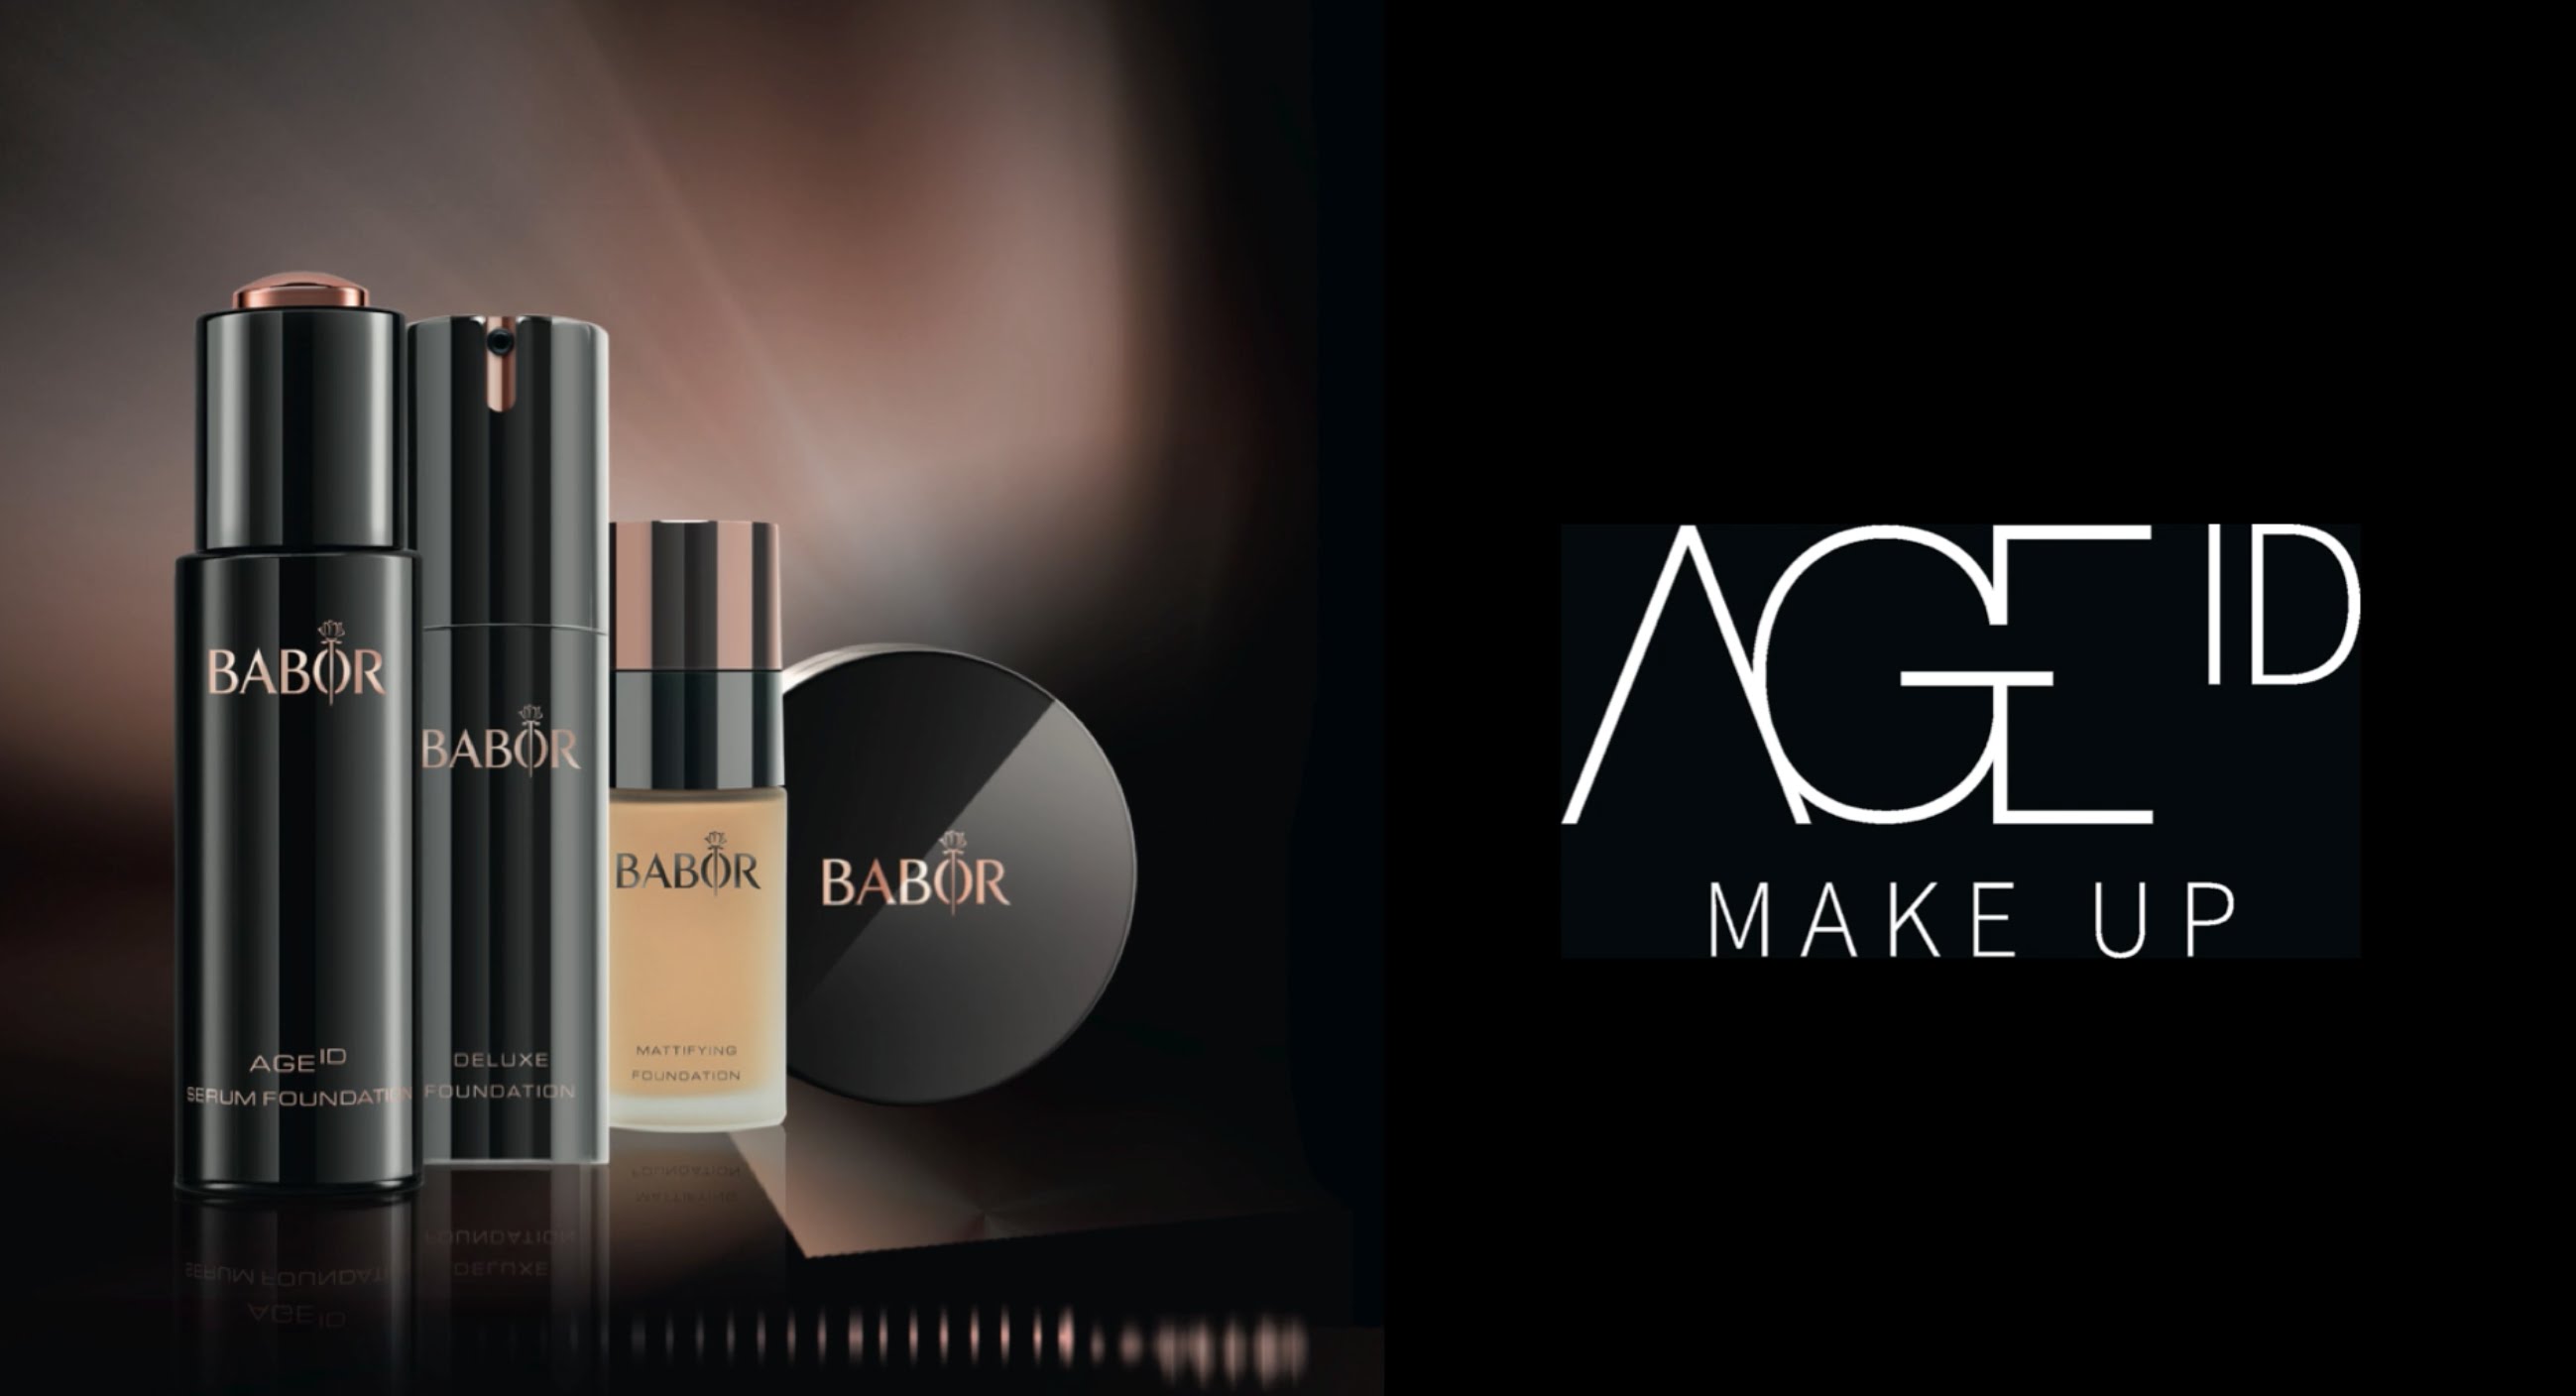 Babor age conceal foundation - Die preiswertesten Babor age conceal foundation unter die Lupe genommen